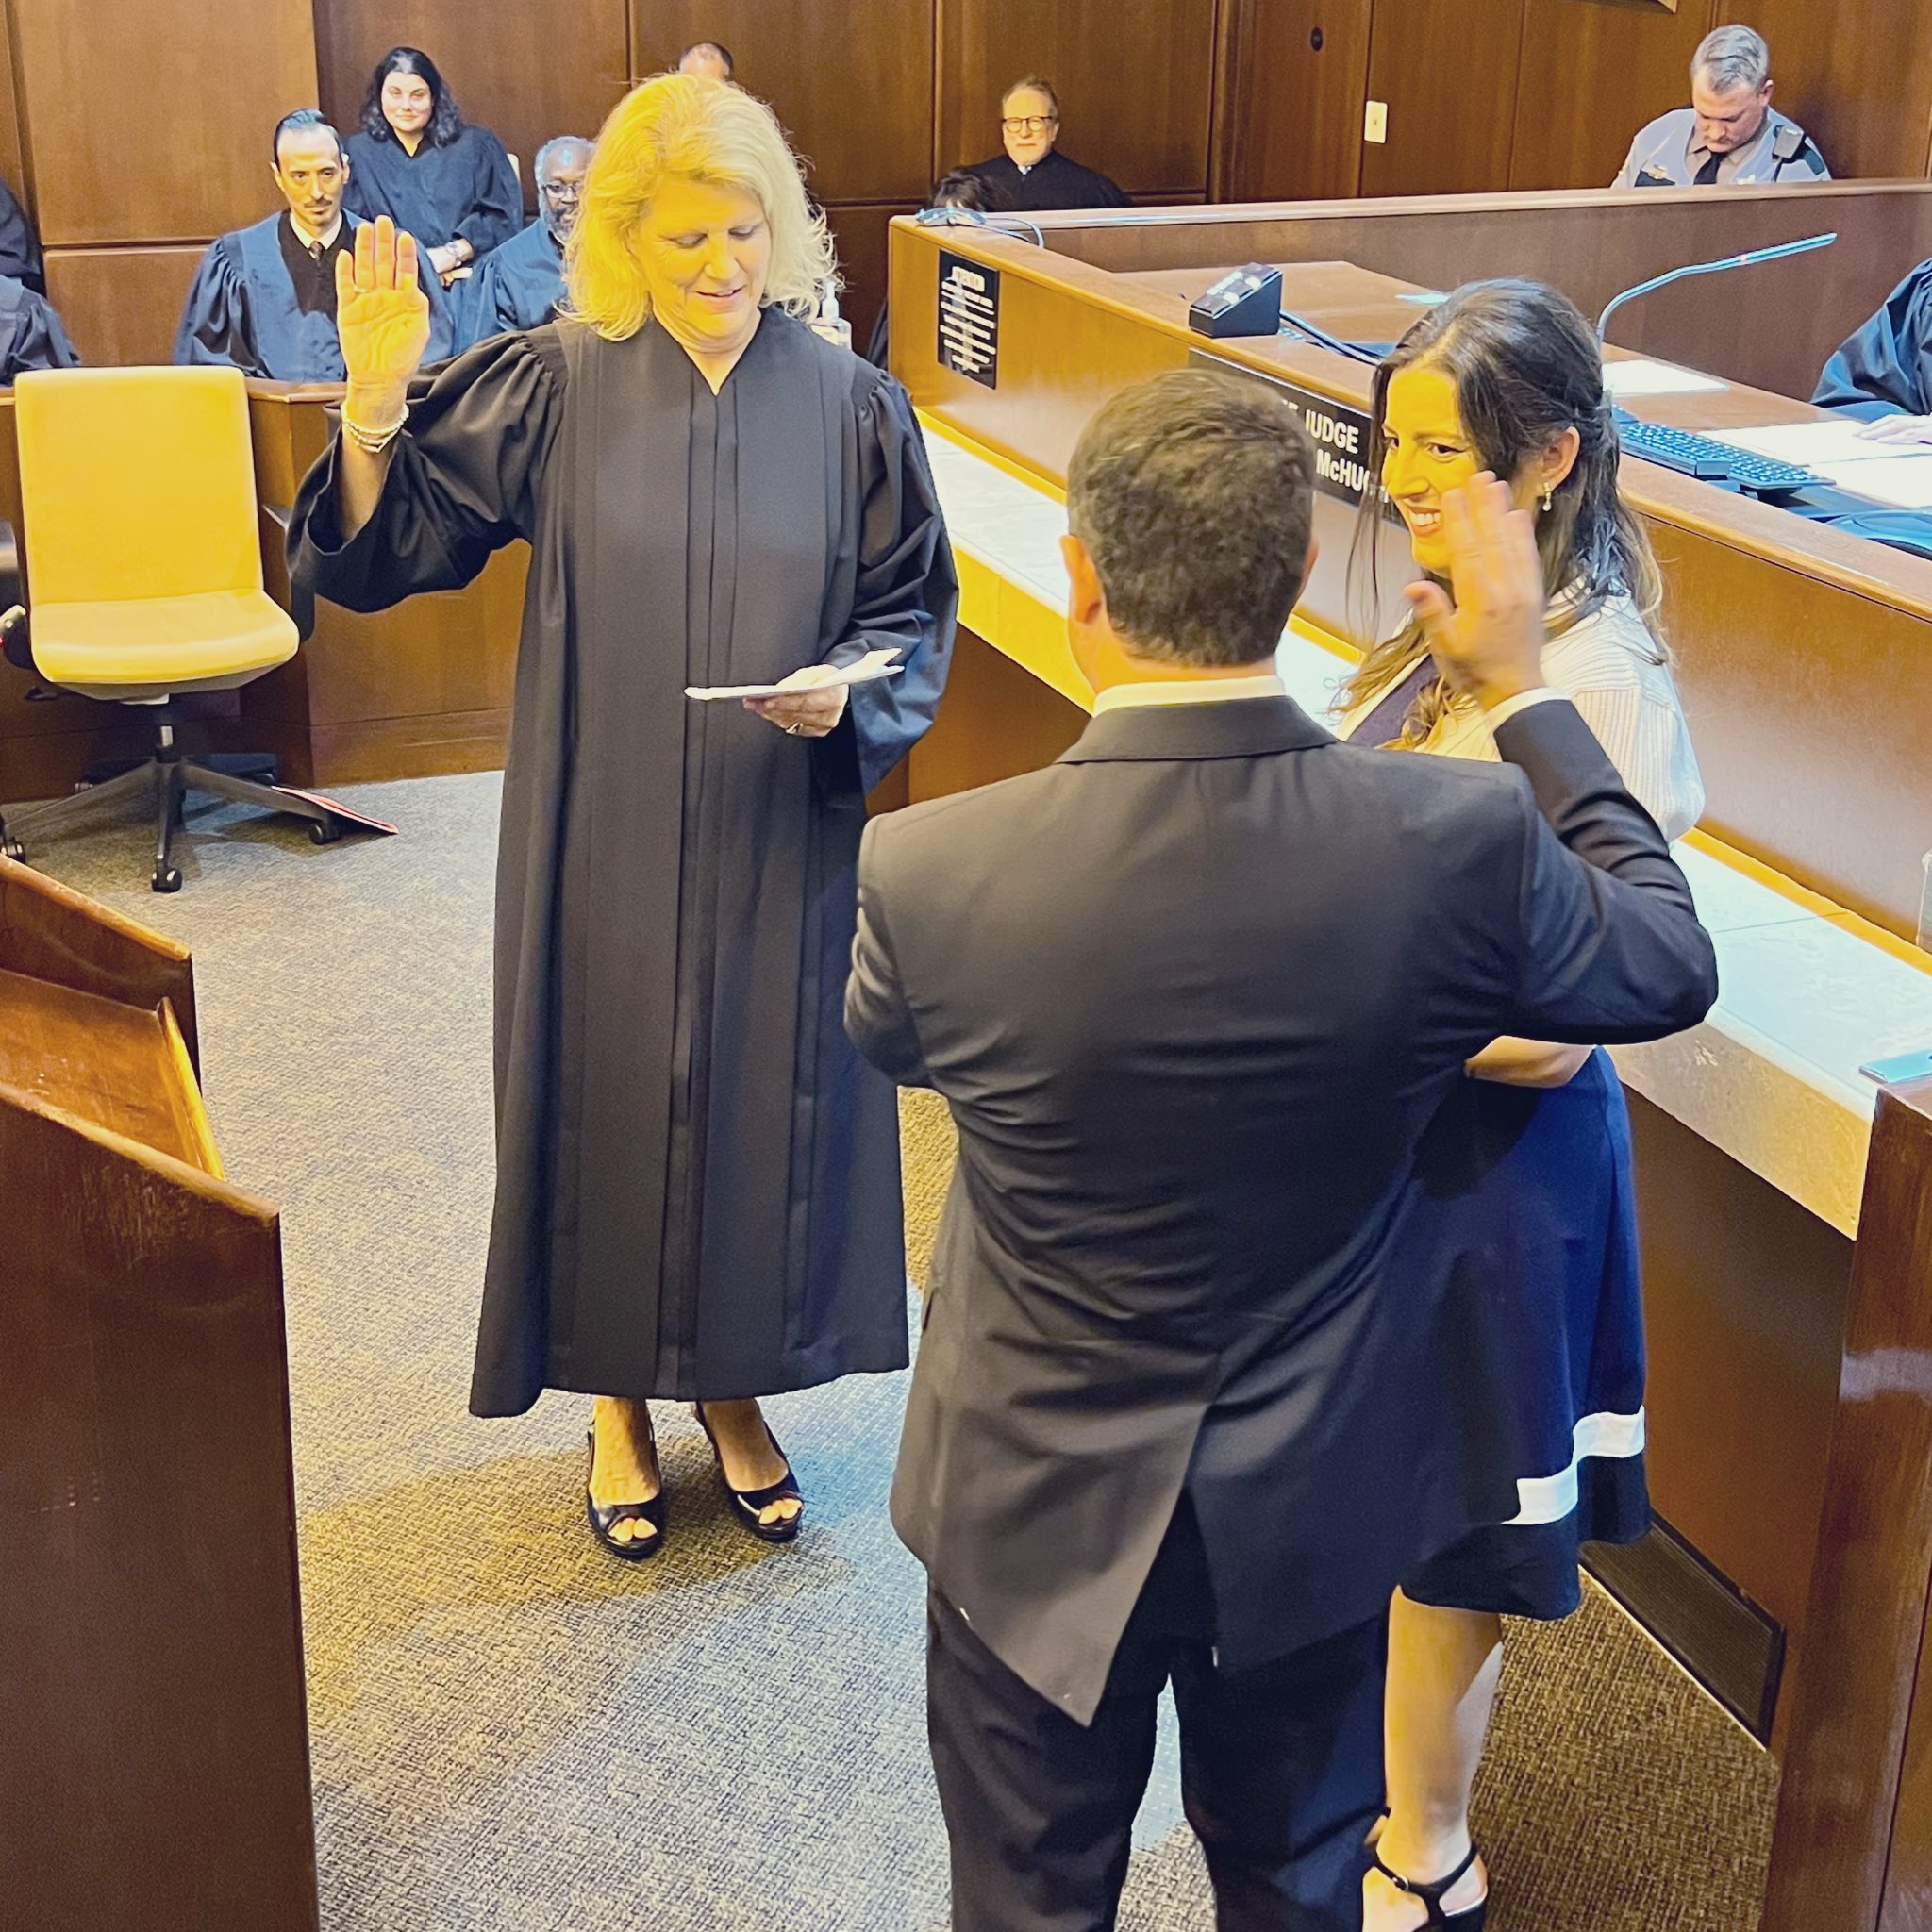 Judge Sheri Polster Chappell giving the oath of office to Judge Cohen